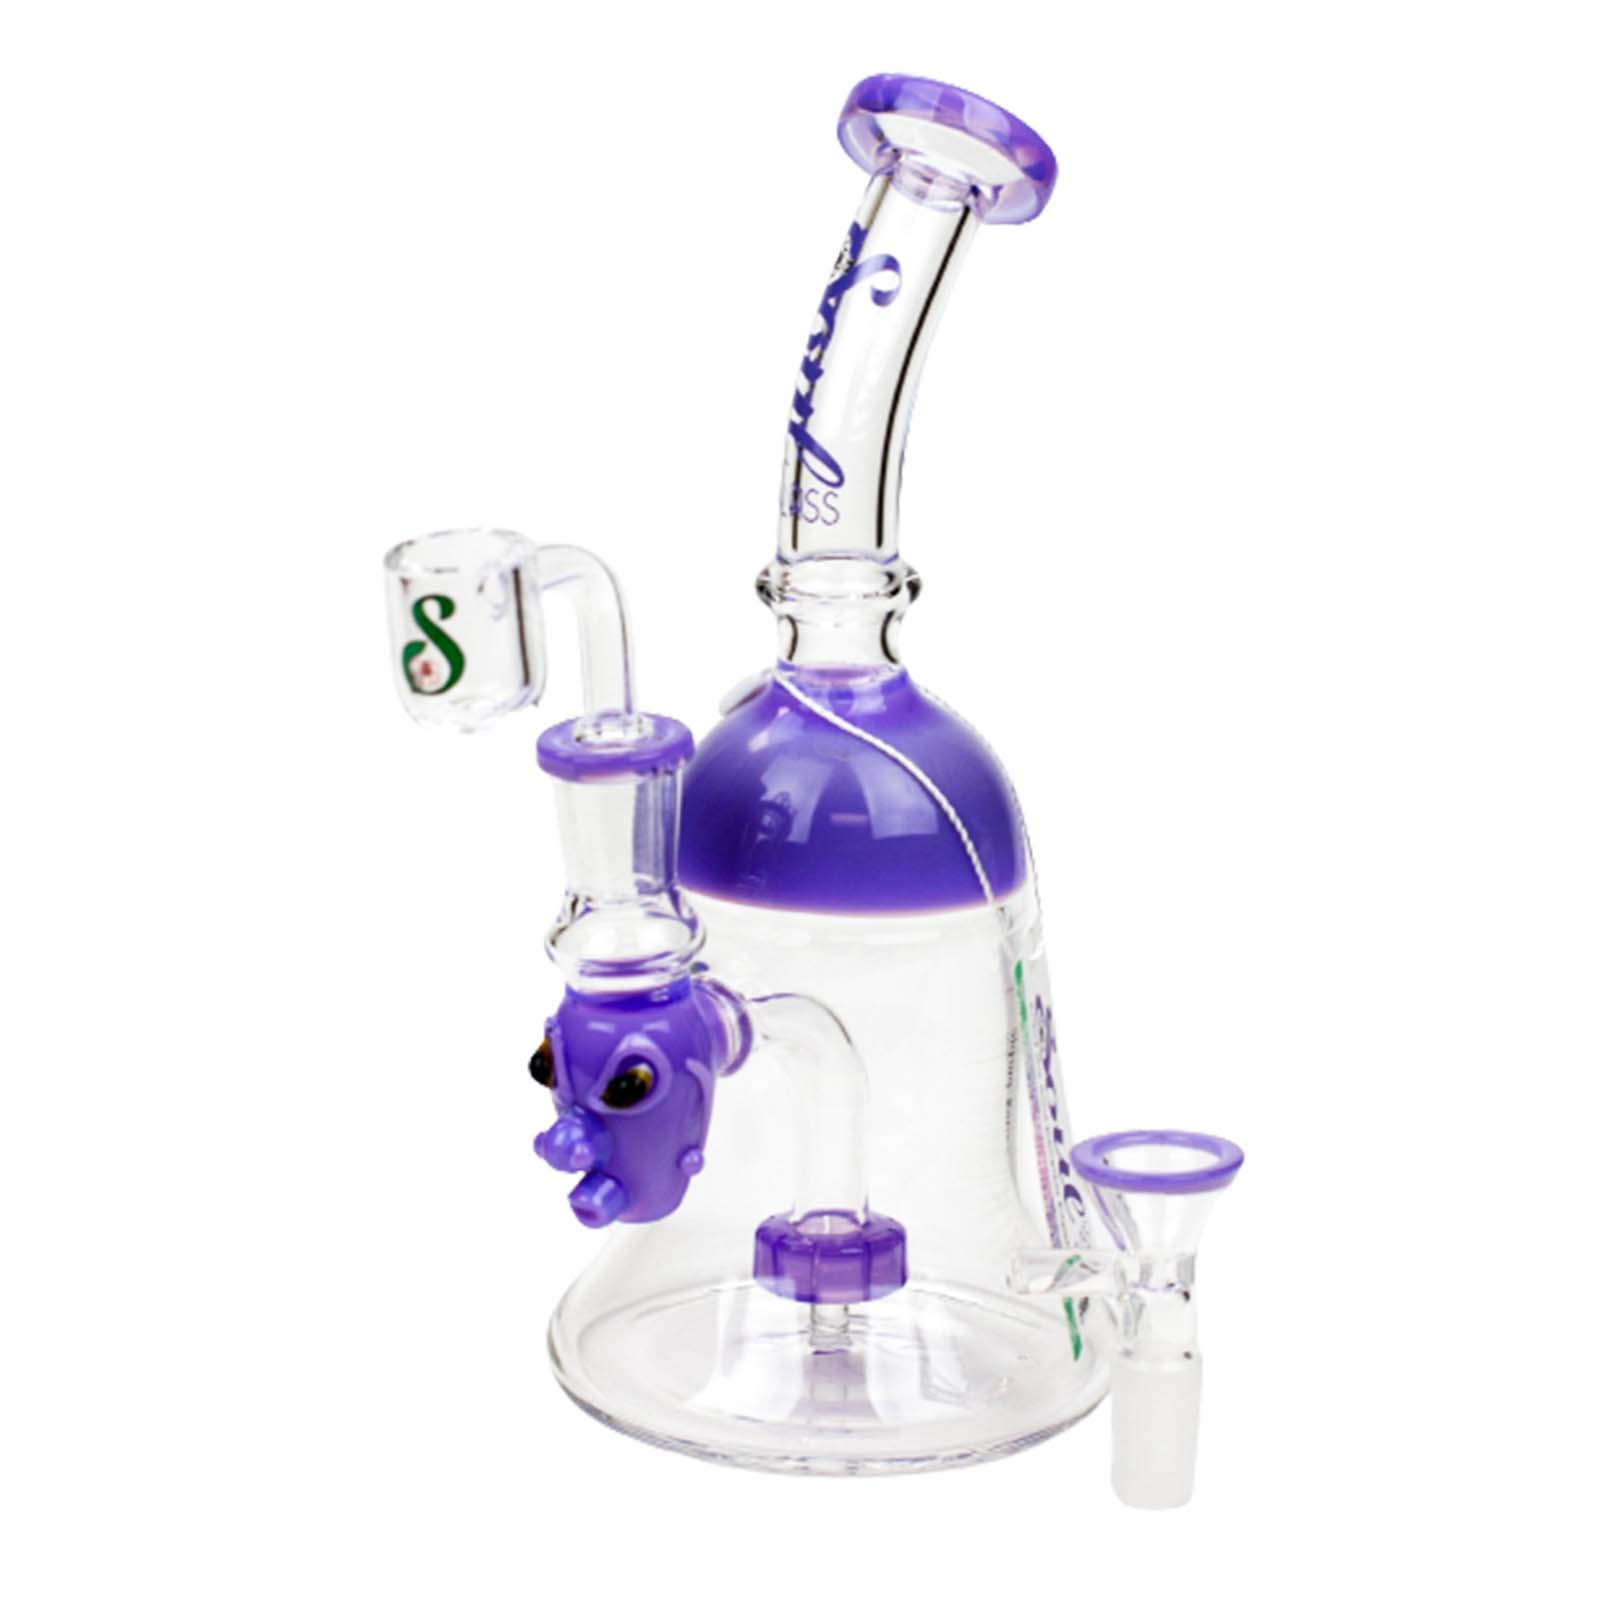 8.5" SOUL 2-in-1 Showerhead Diffuser Recycler Rig Pilotdiary